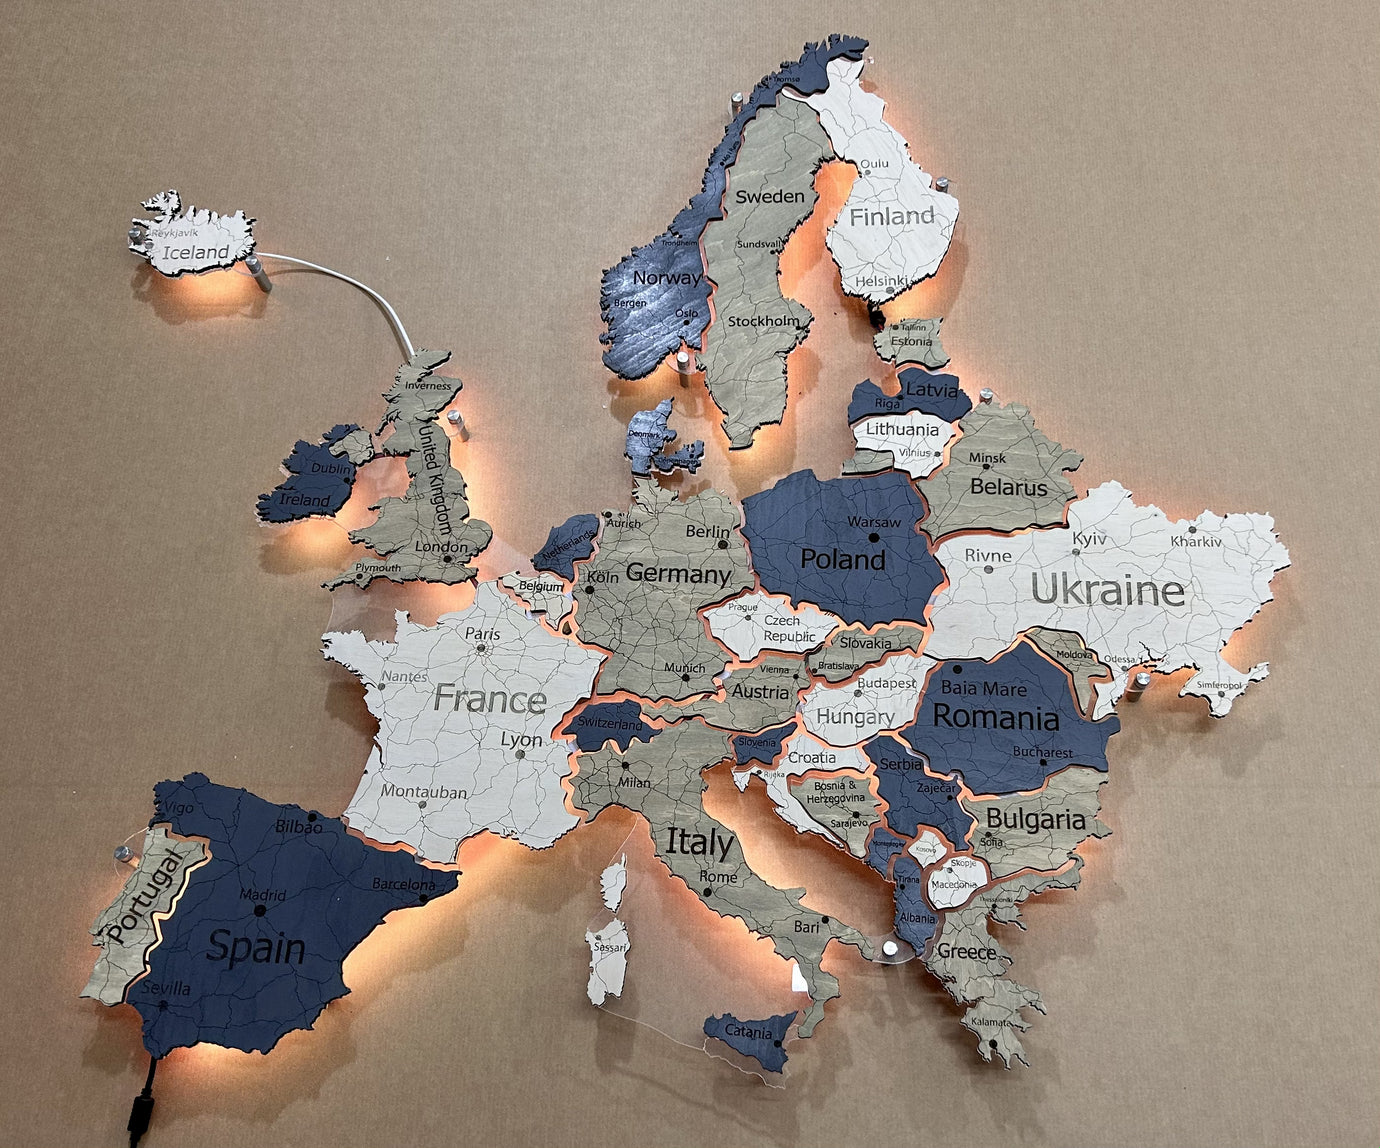 Europe LED map on acrylic glass with backlighting between countries color Deep